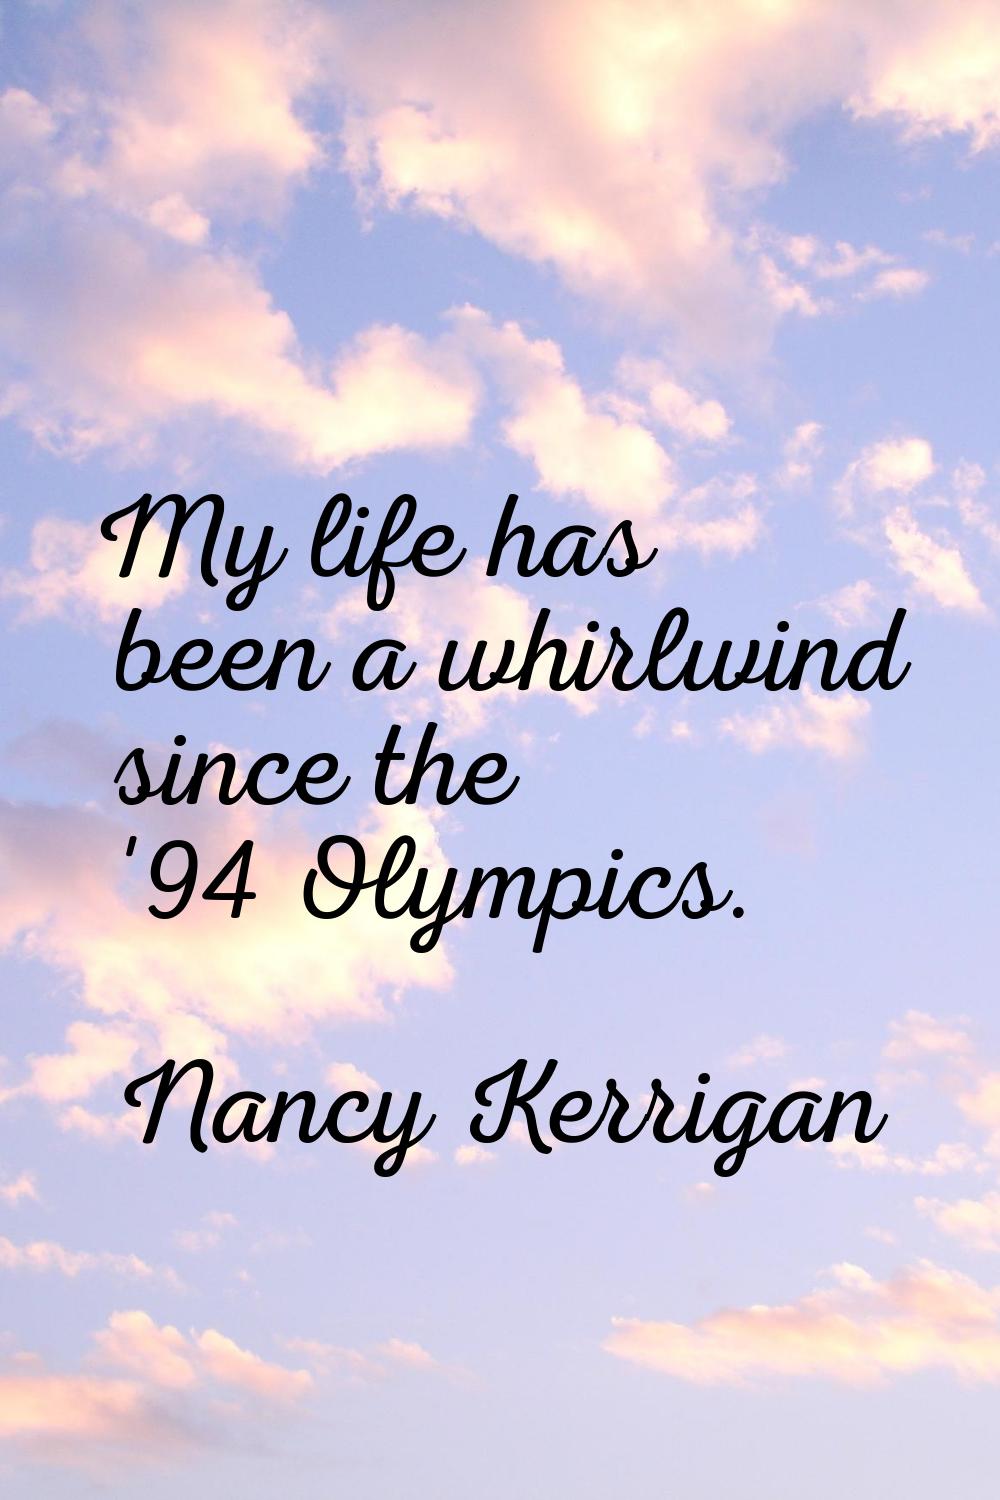 My life has been a whirlwind since the '94 Olympics.